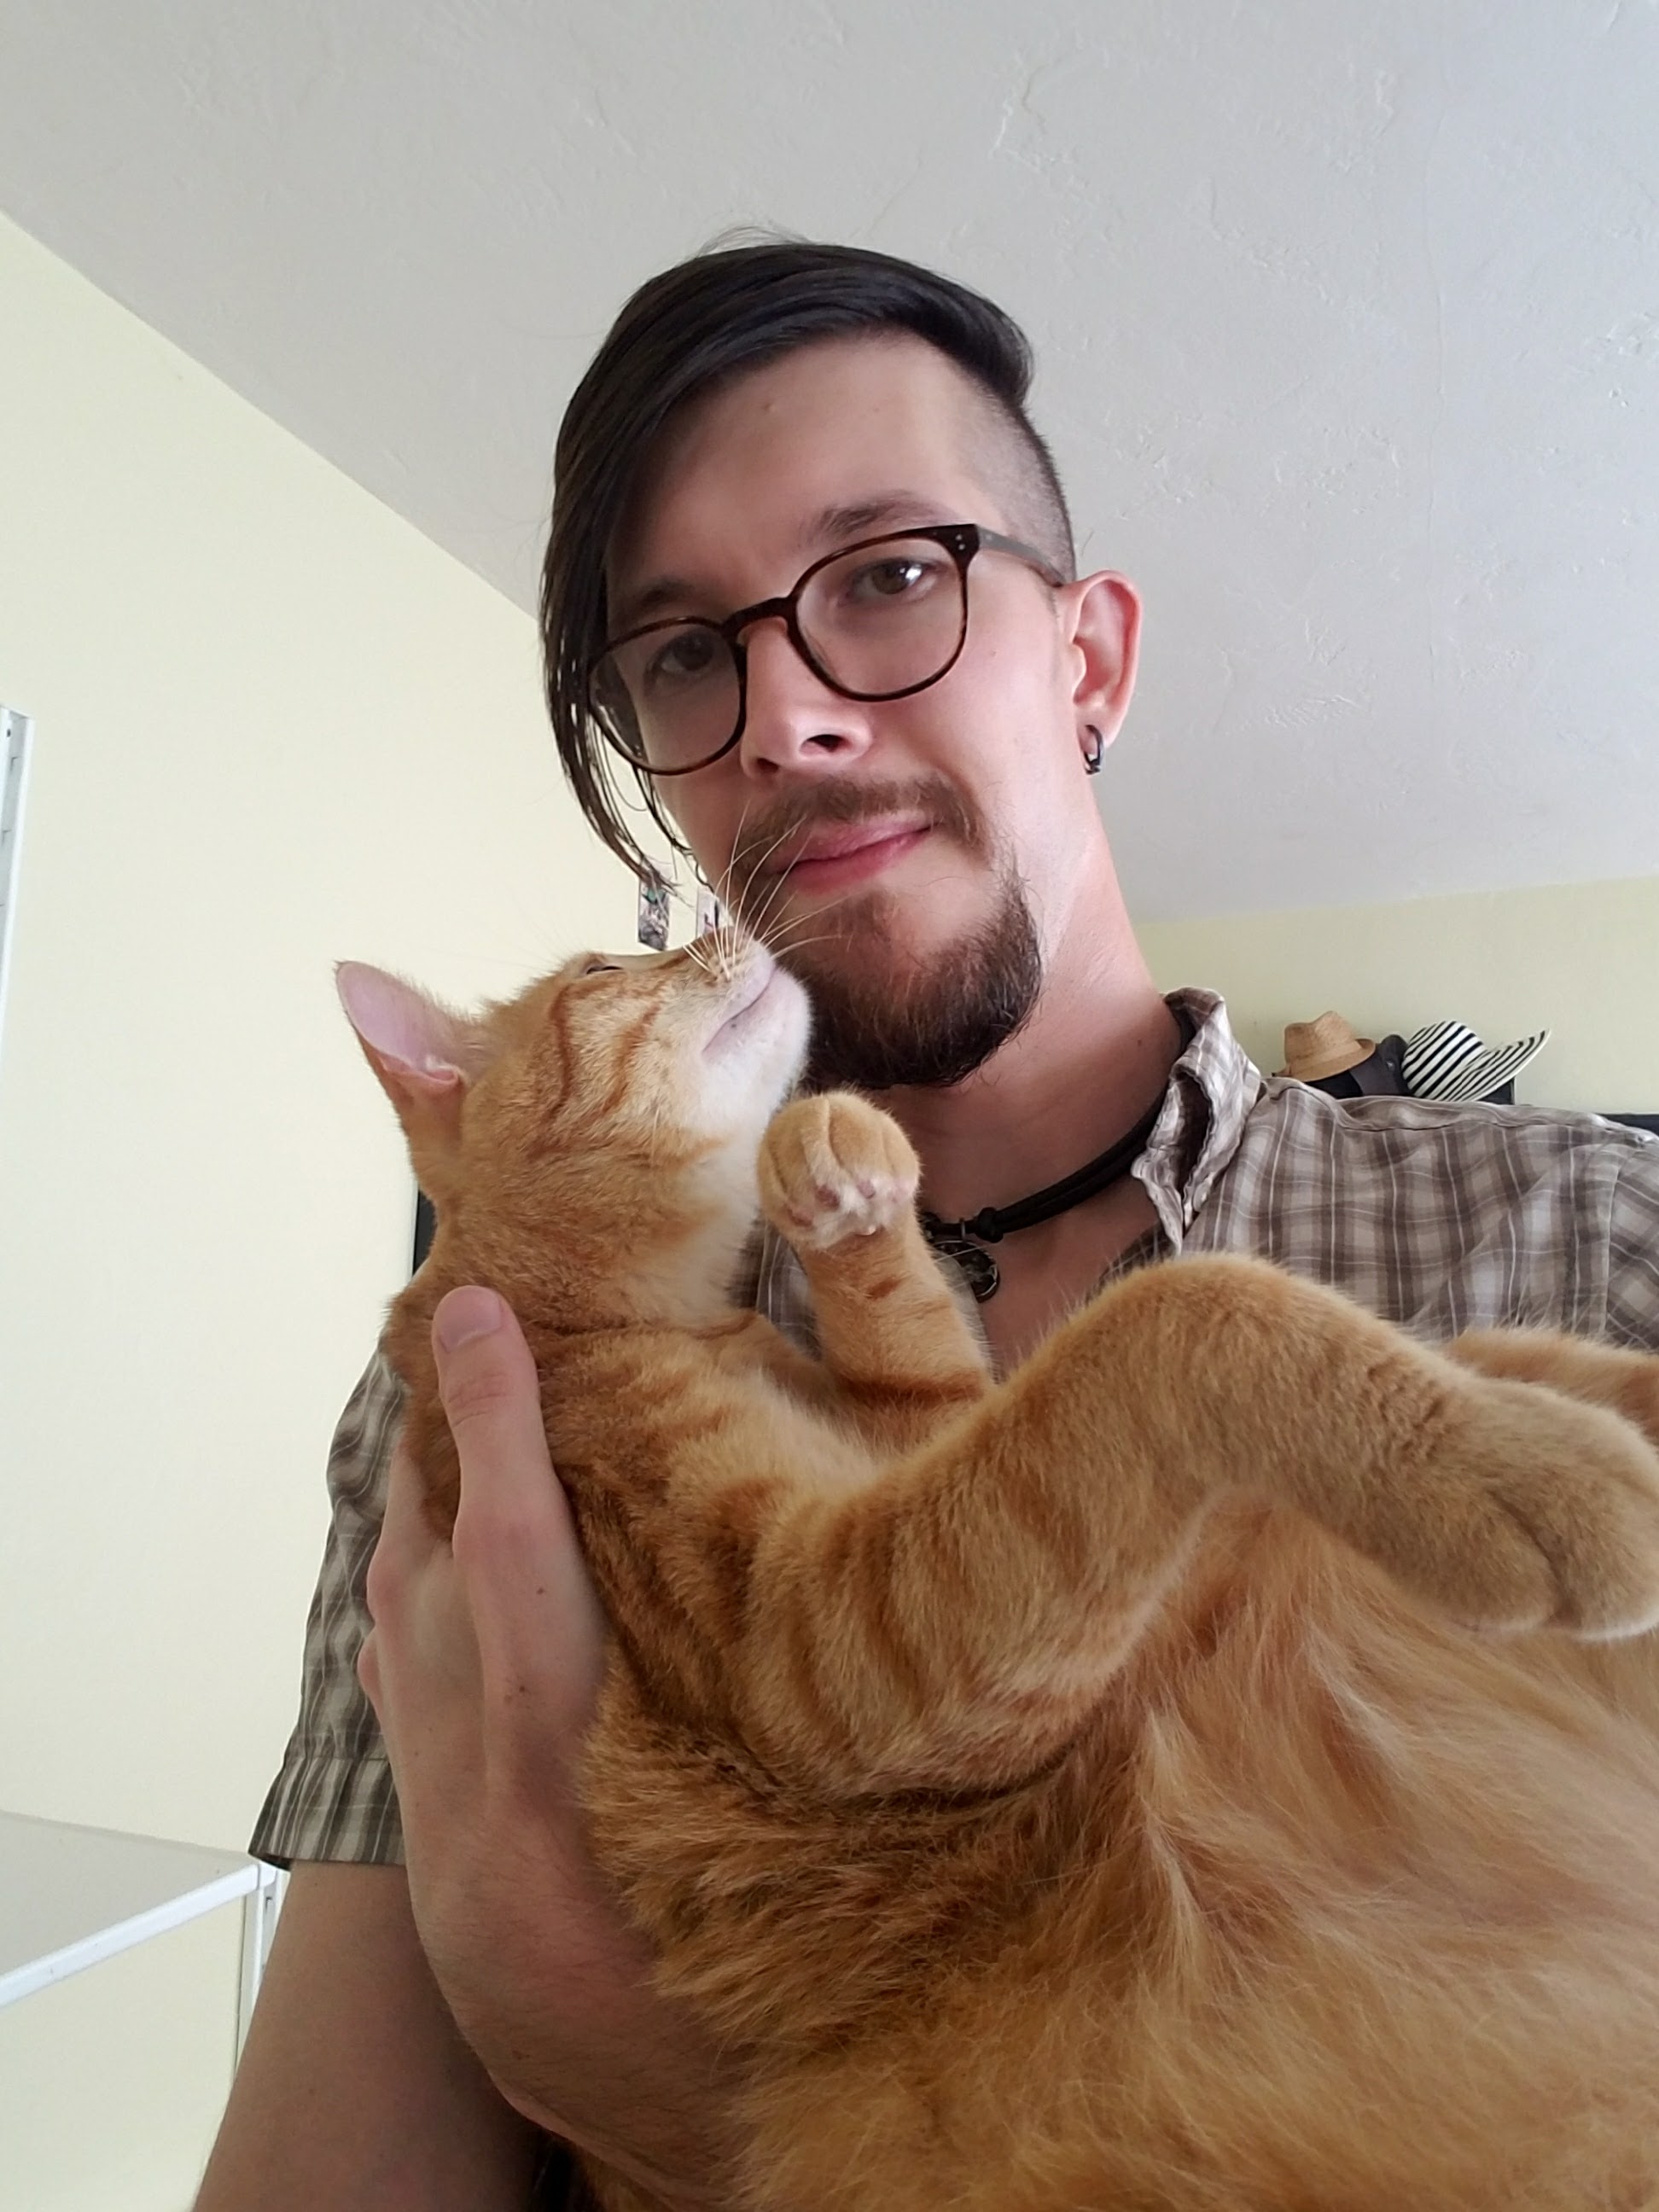 Image of Hilary, wearing round, brown glasses, their hair styled in an undercut and swept to the right of their face, holding an orange cat.